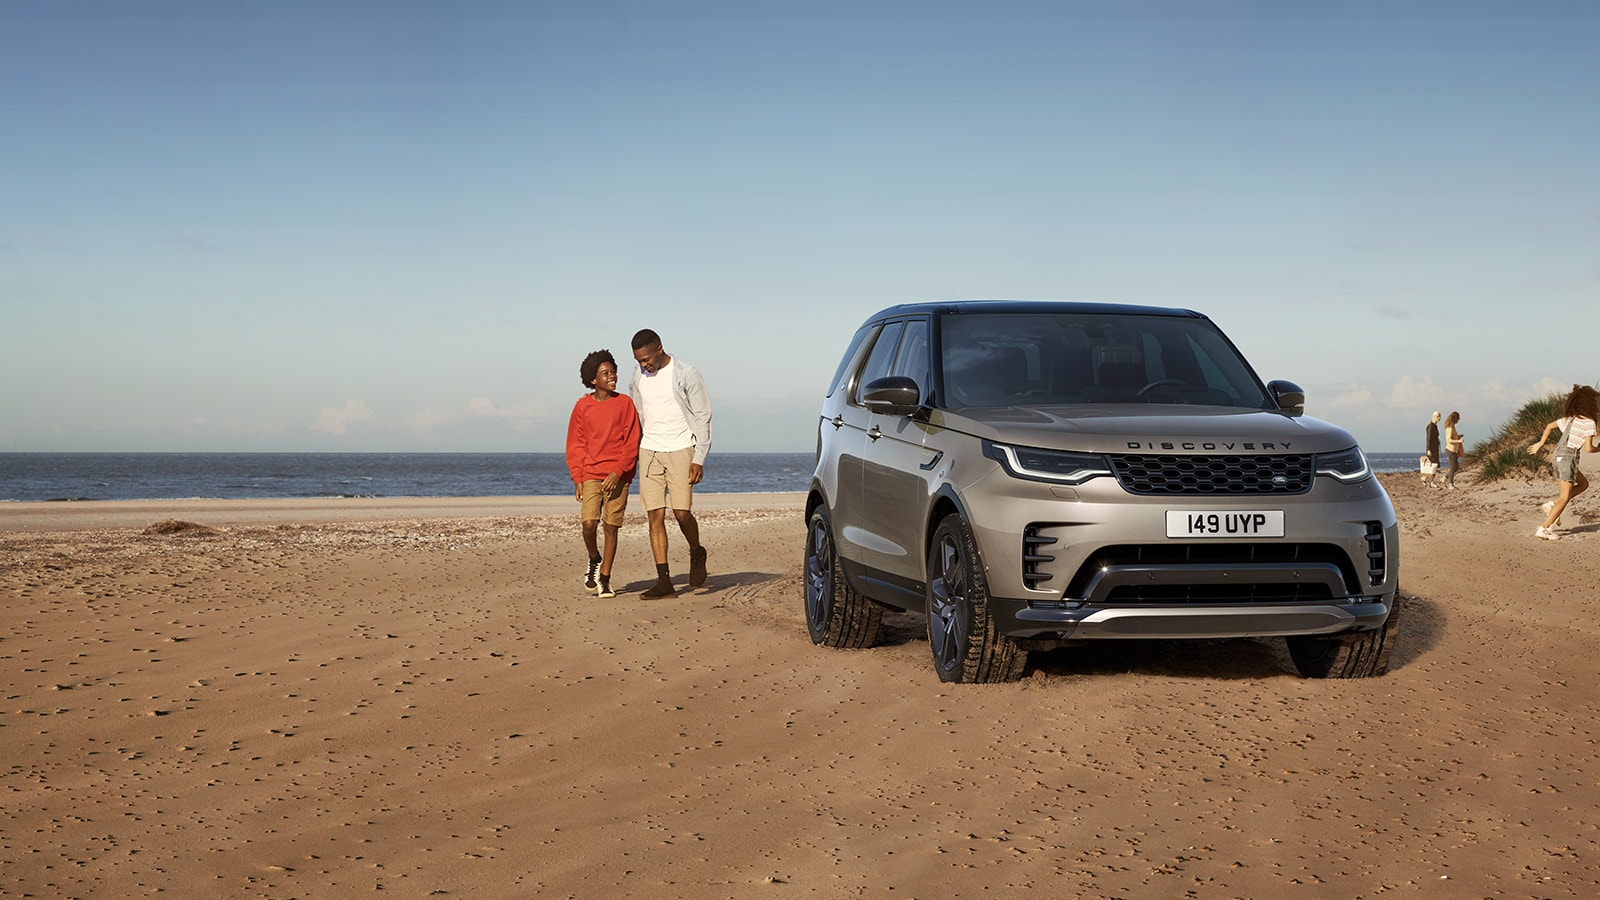 THE NEW LAND ROVER DISCOVERY